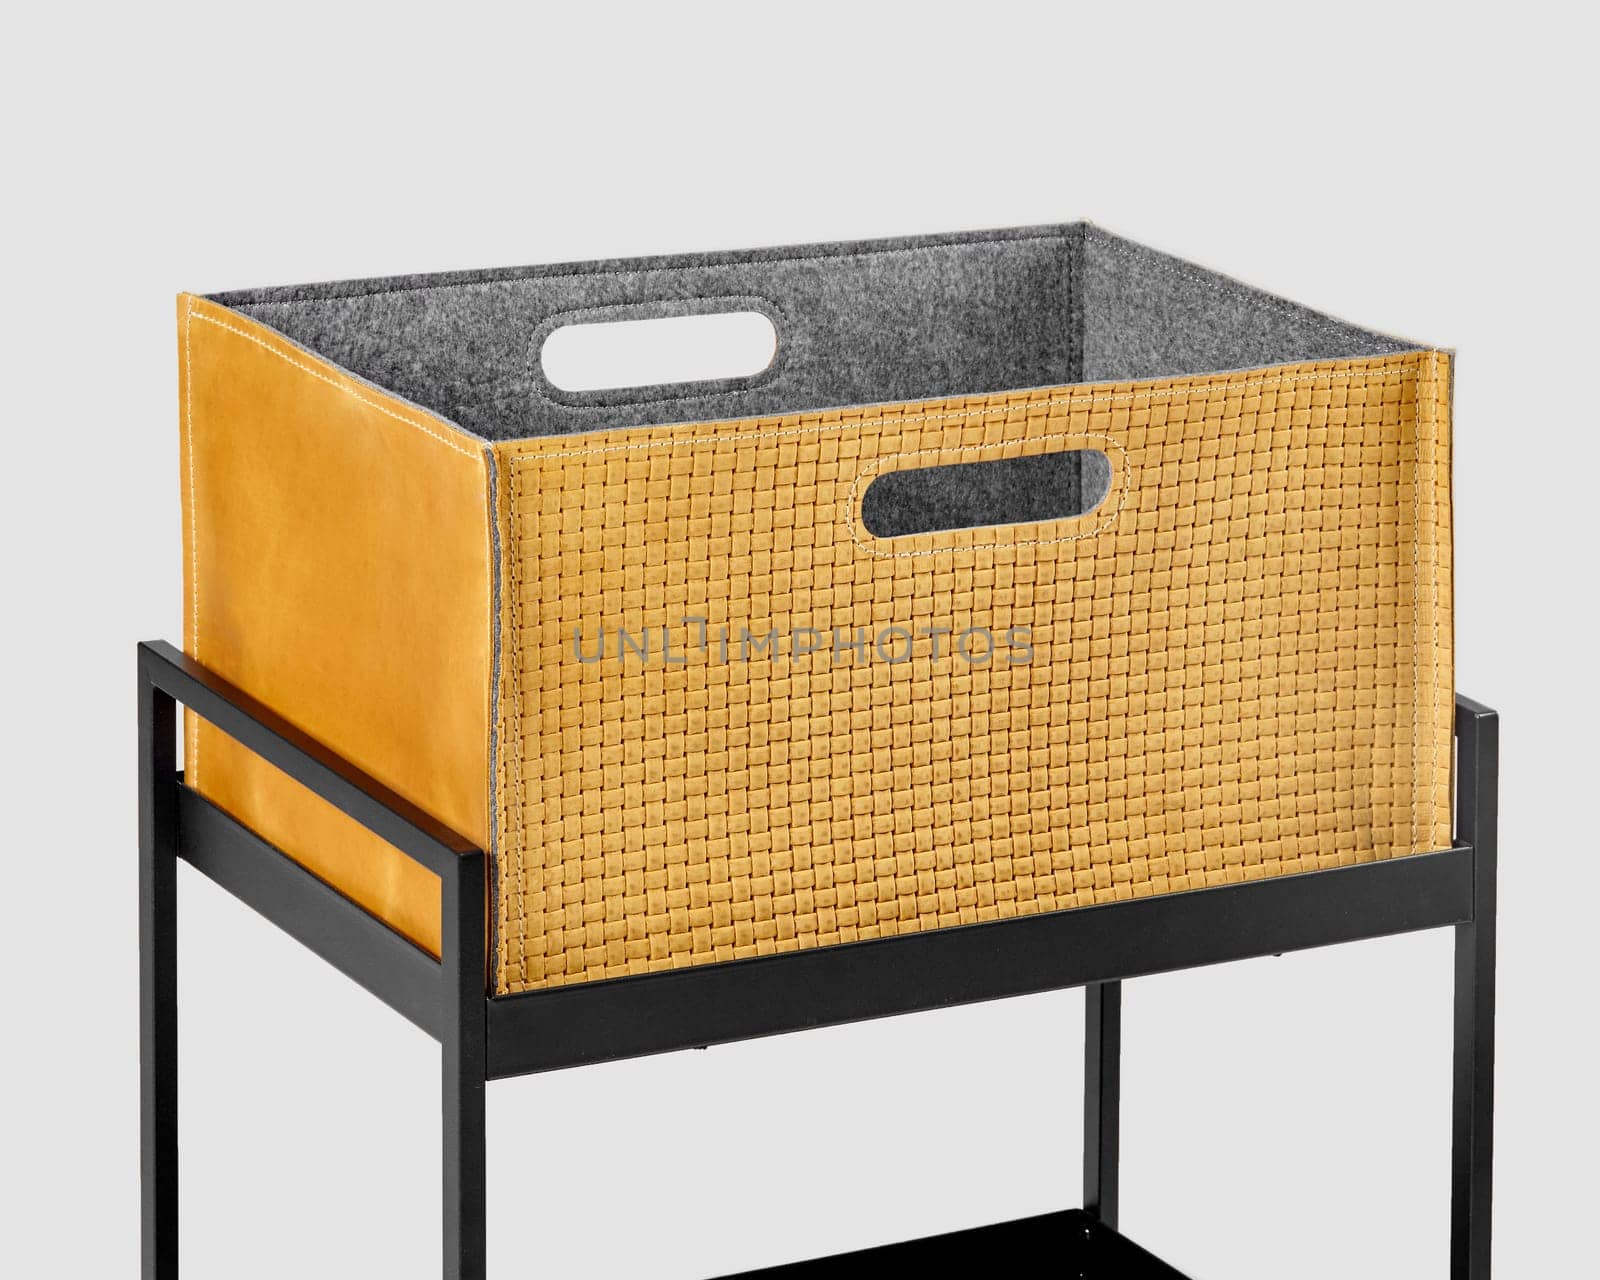 Comfortable tan suede woven box with convenient slotted handles for storing office supplies and document placed on metal shelving rack. Stylish craft accessory for interior design